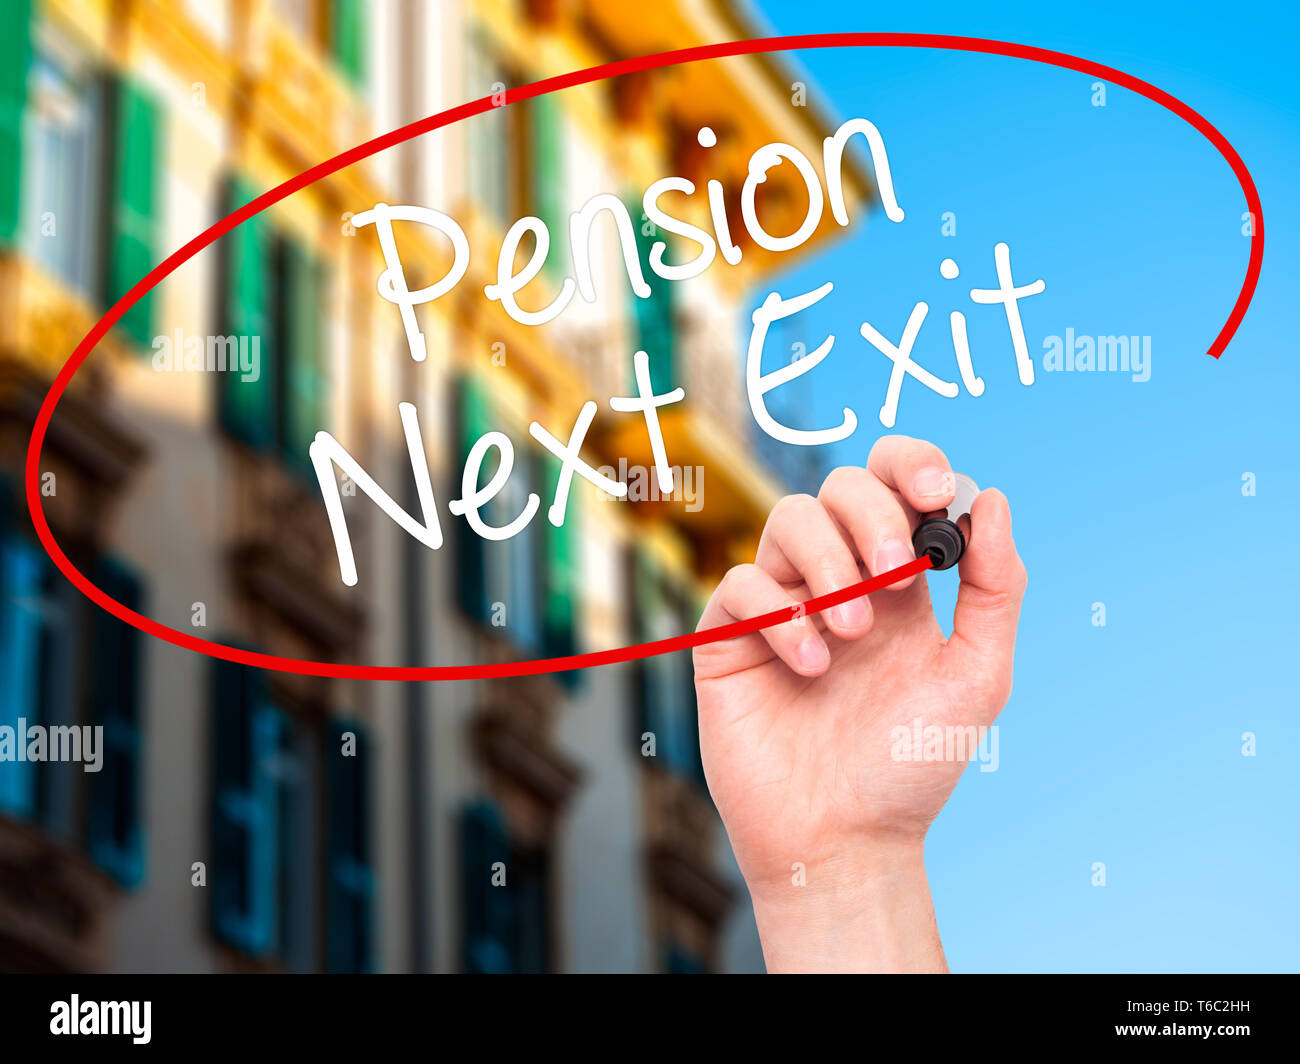 Man Hand writing Pension Next Exit with black marker on visual screen Stock Photo